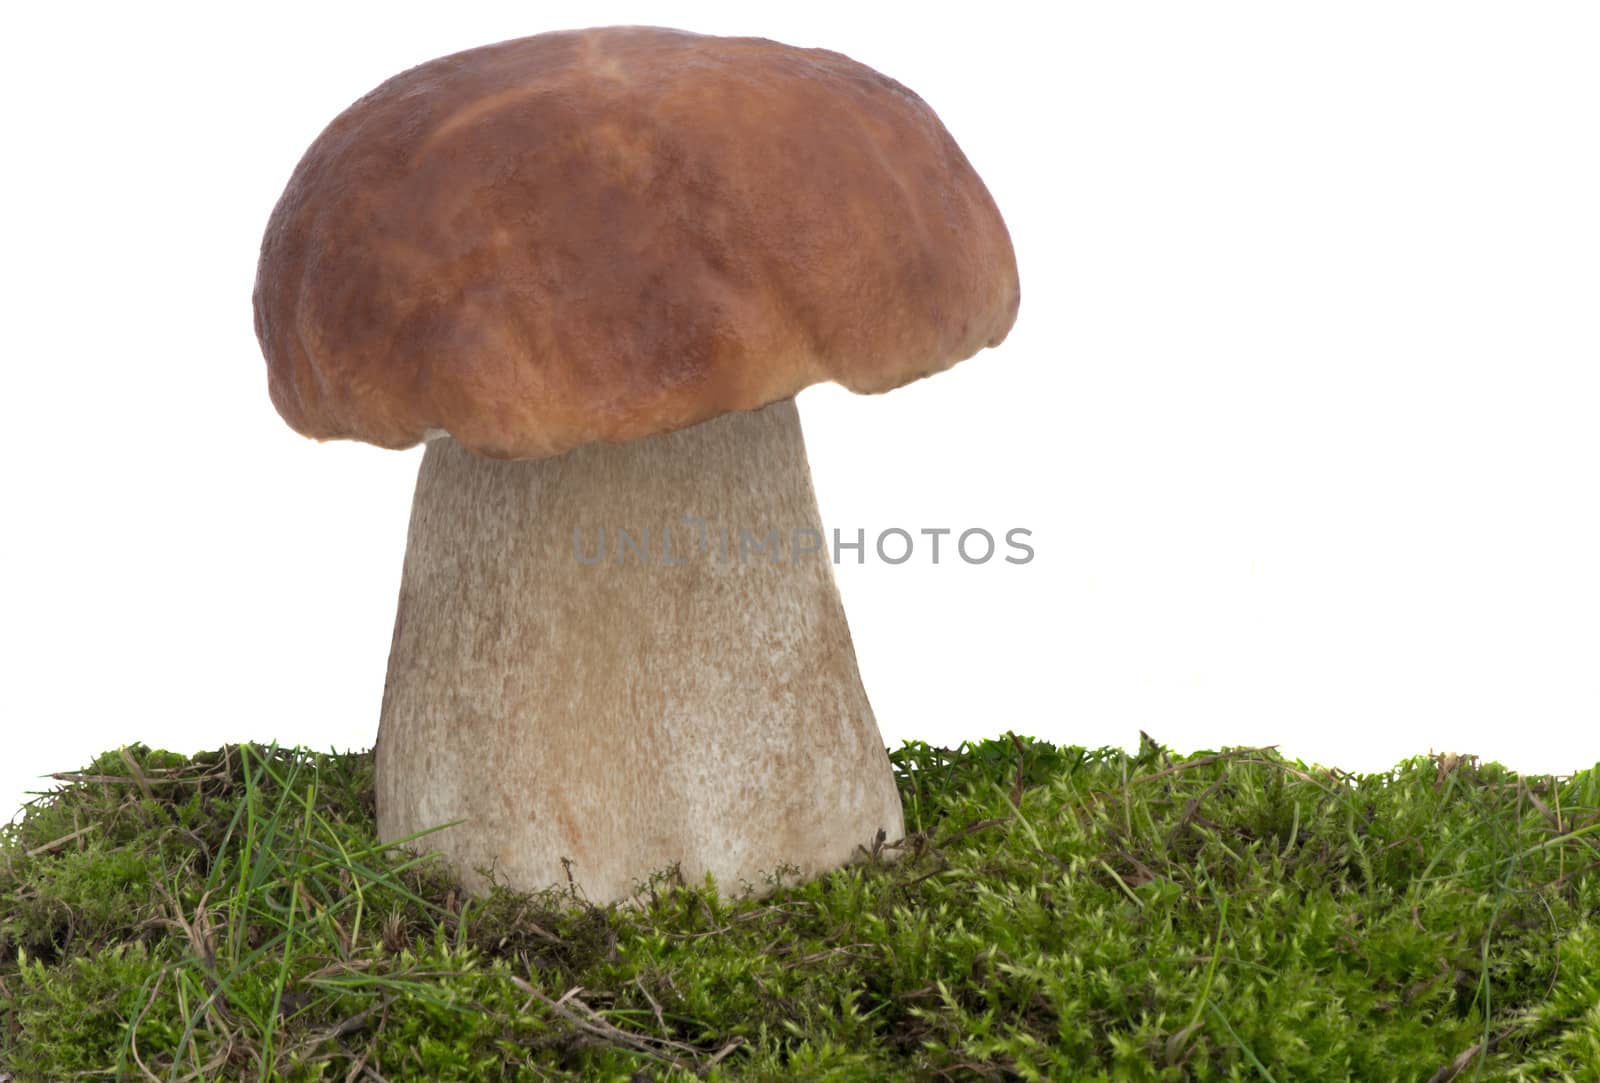 One big beautiful white fungus on the green grass. Presented on a white background